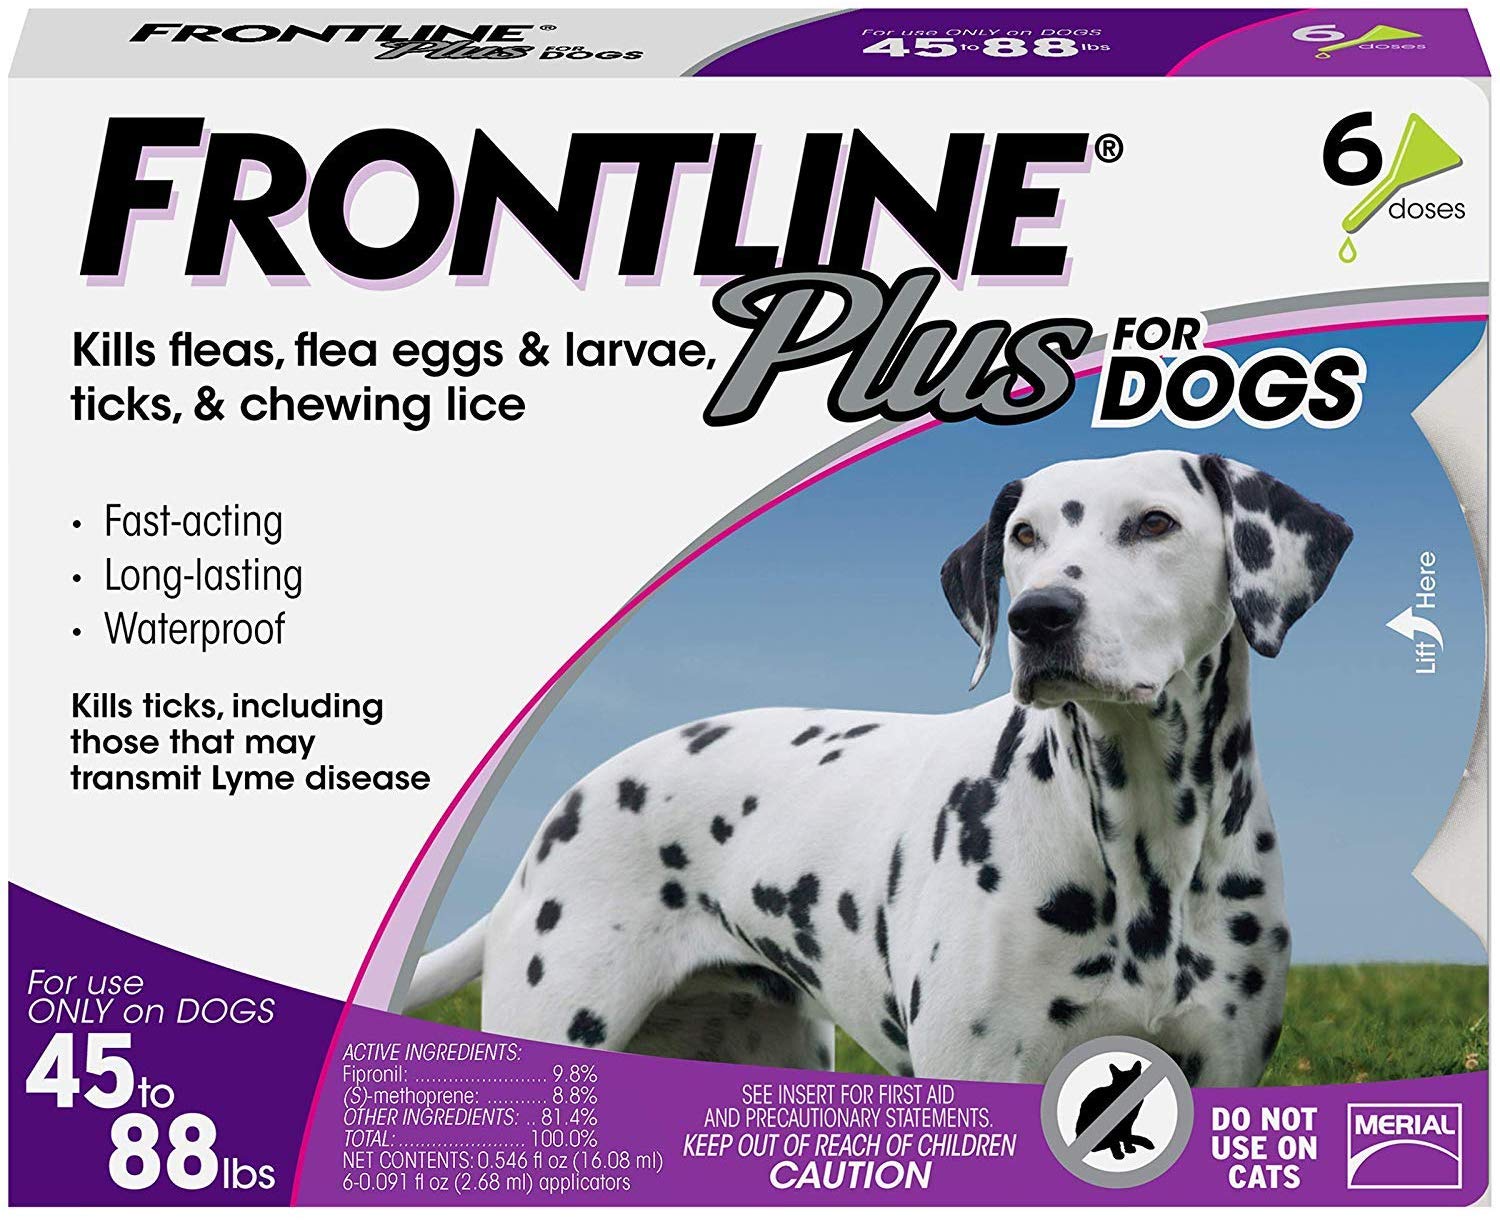 Frontline Plus Flea and Tick Control for Dogs